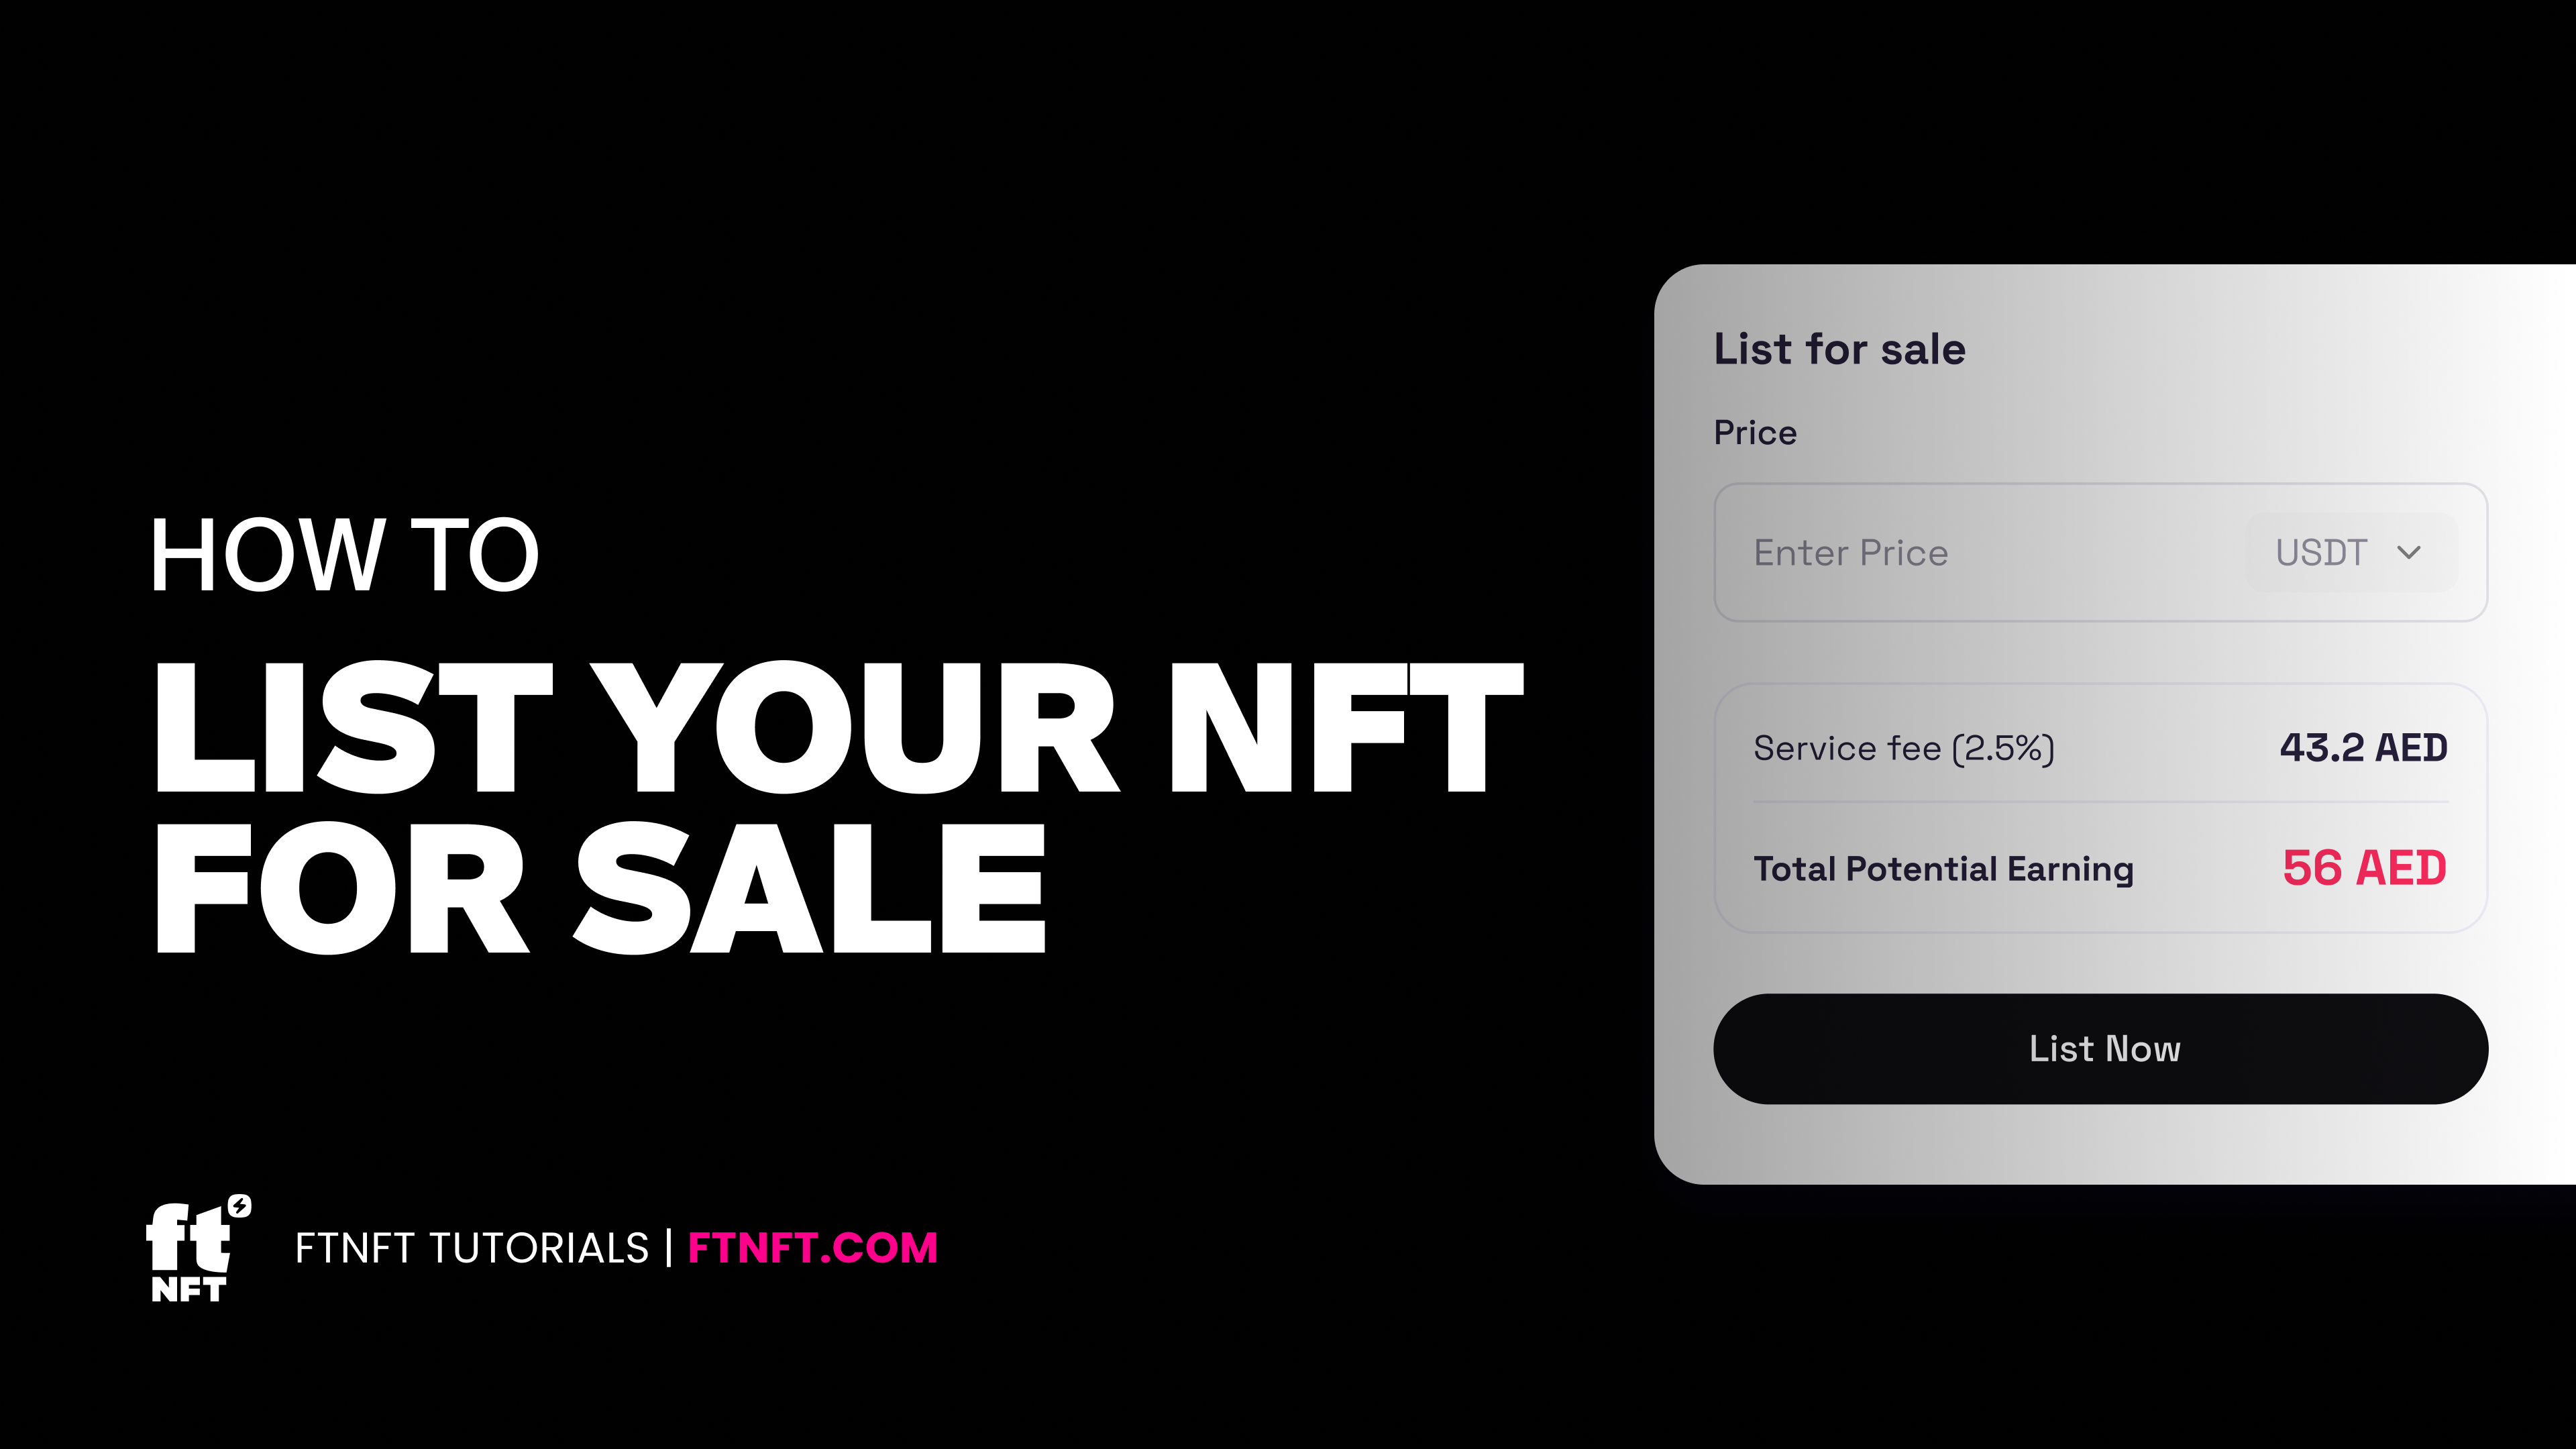 869-how-to-list-your-nft for-sale-1719903767891.png